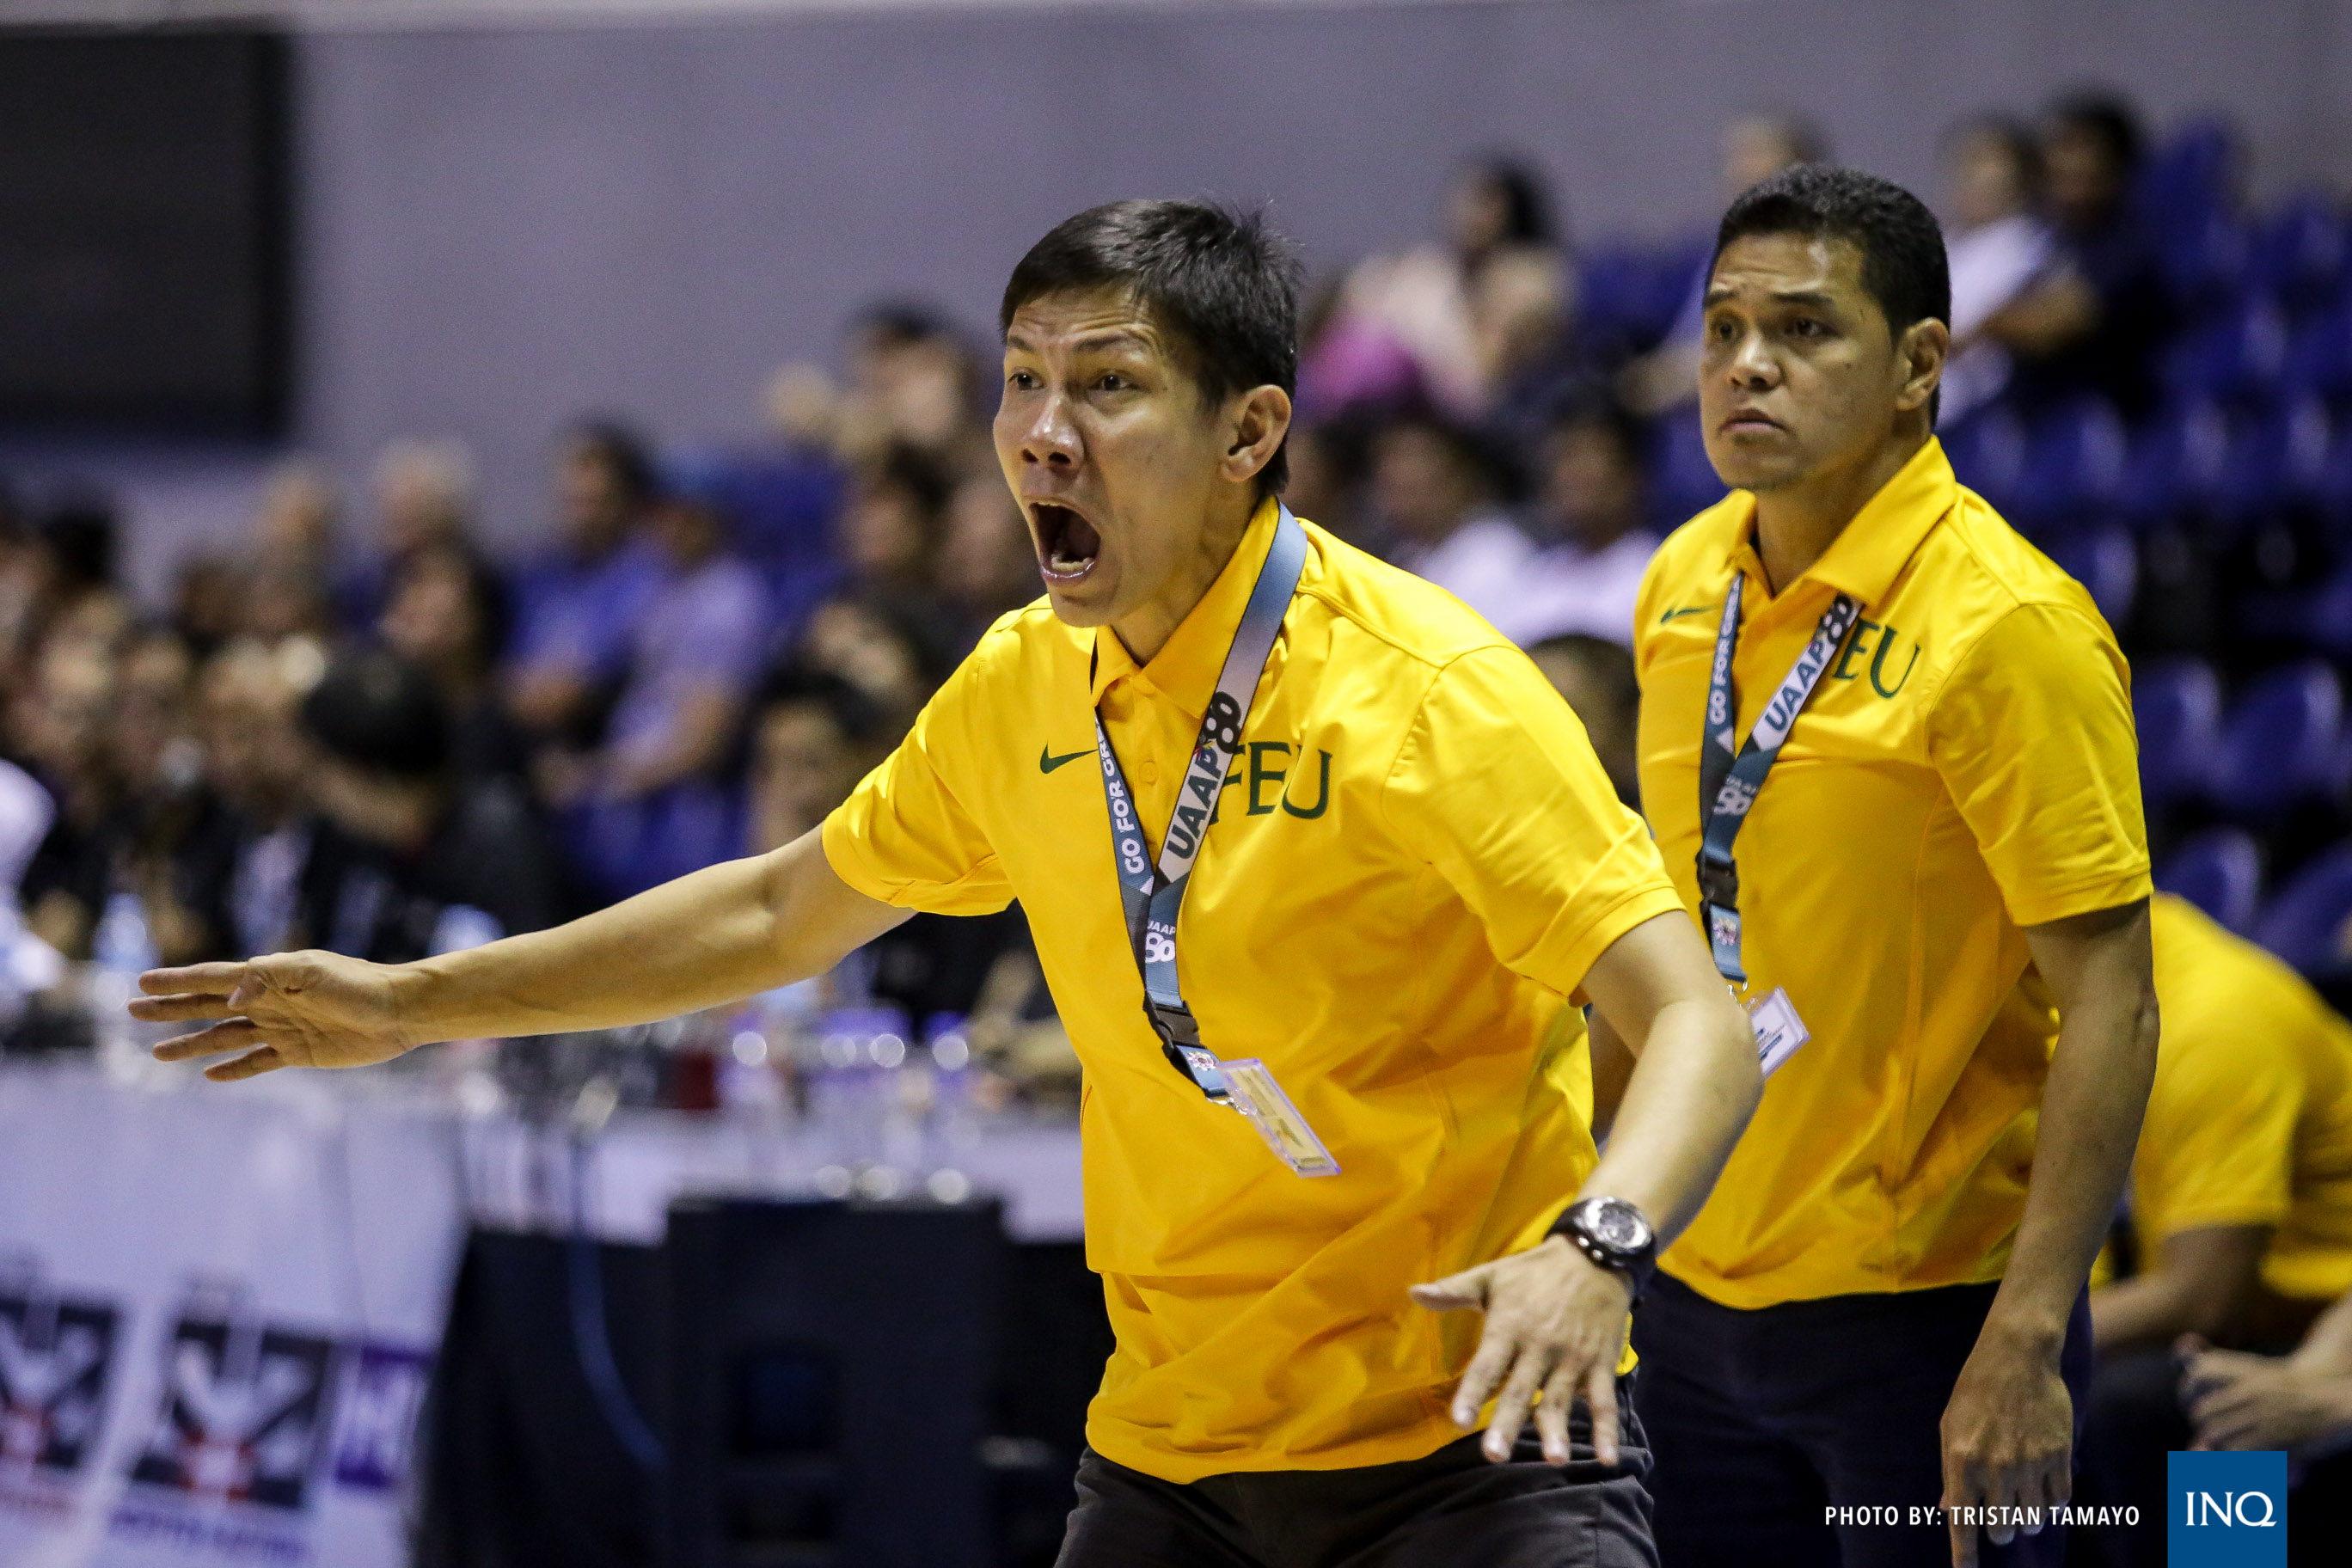 FEU sets record for most 3s with 18, but 42 attempts 'way too much